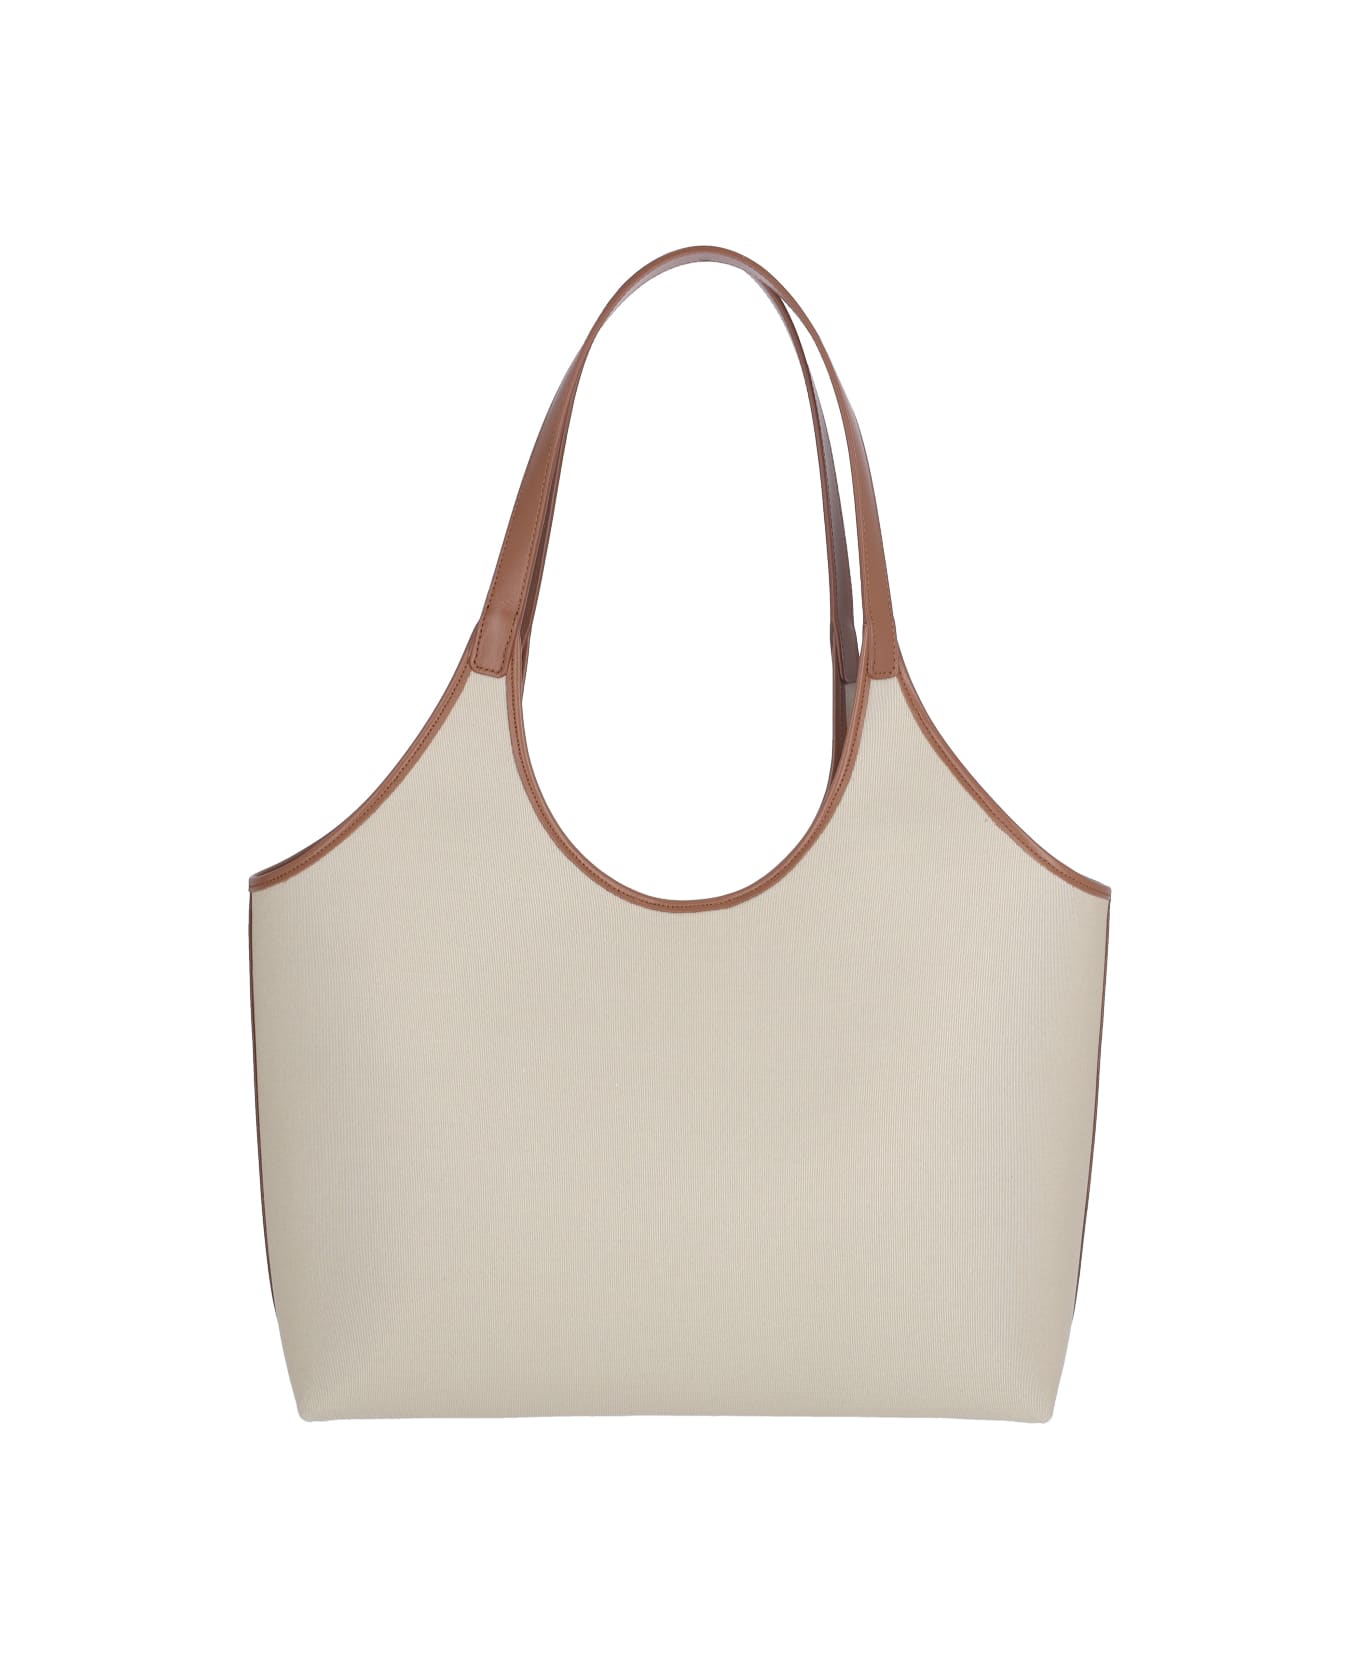 Aesther Ekme 'cabas' Tote Bag - Beige